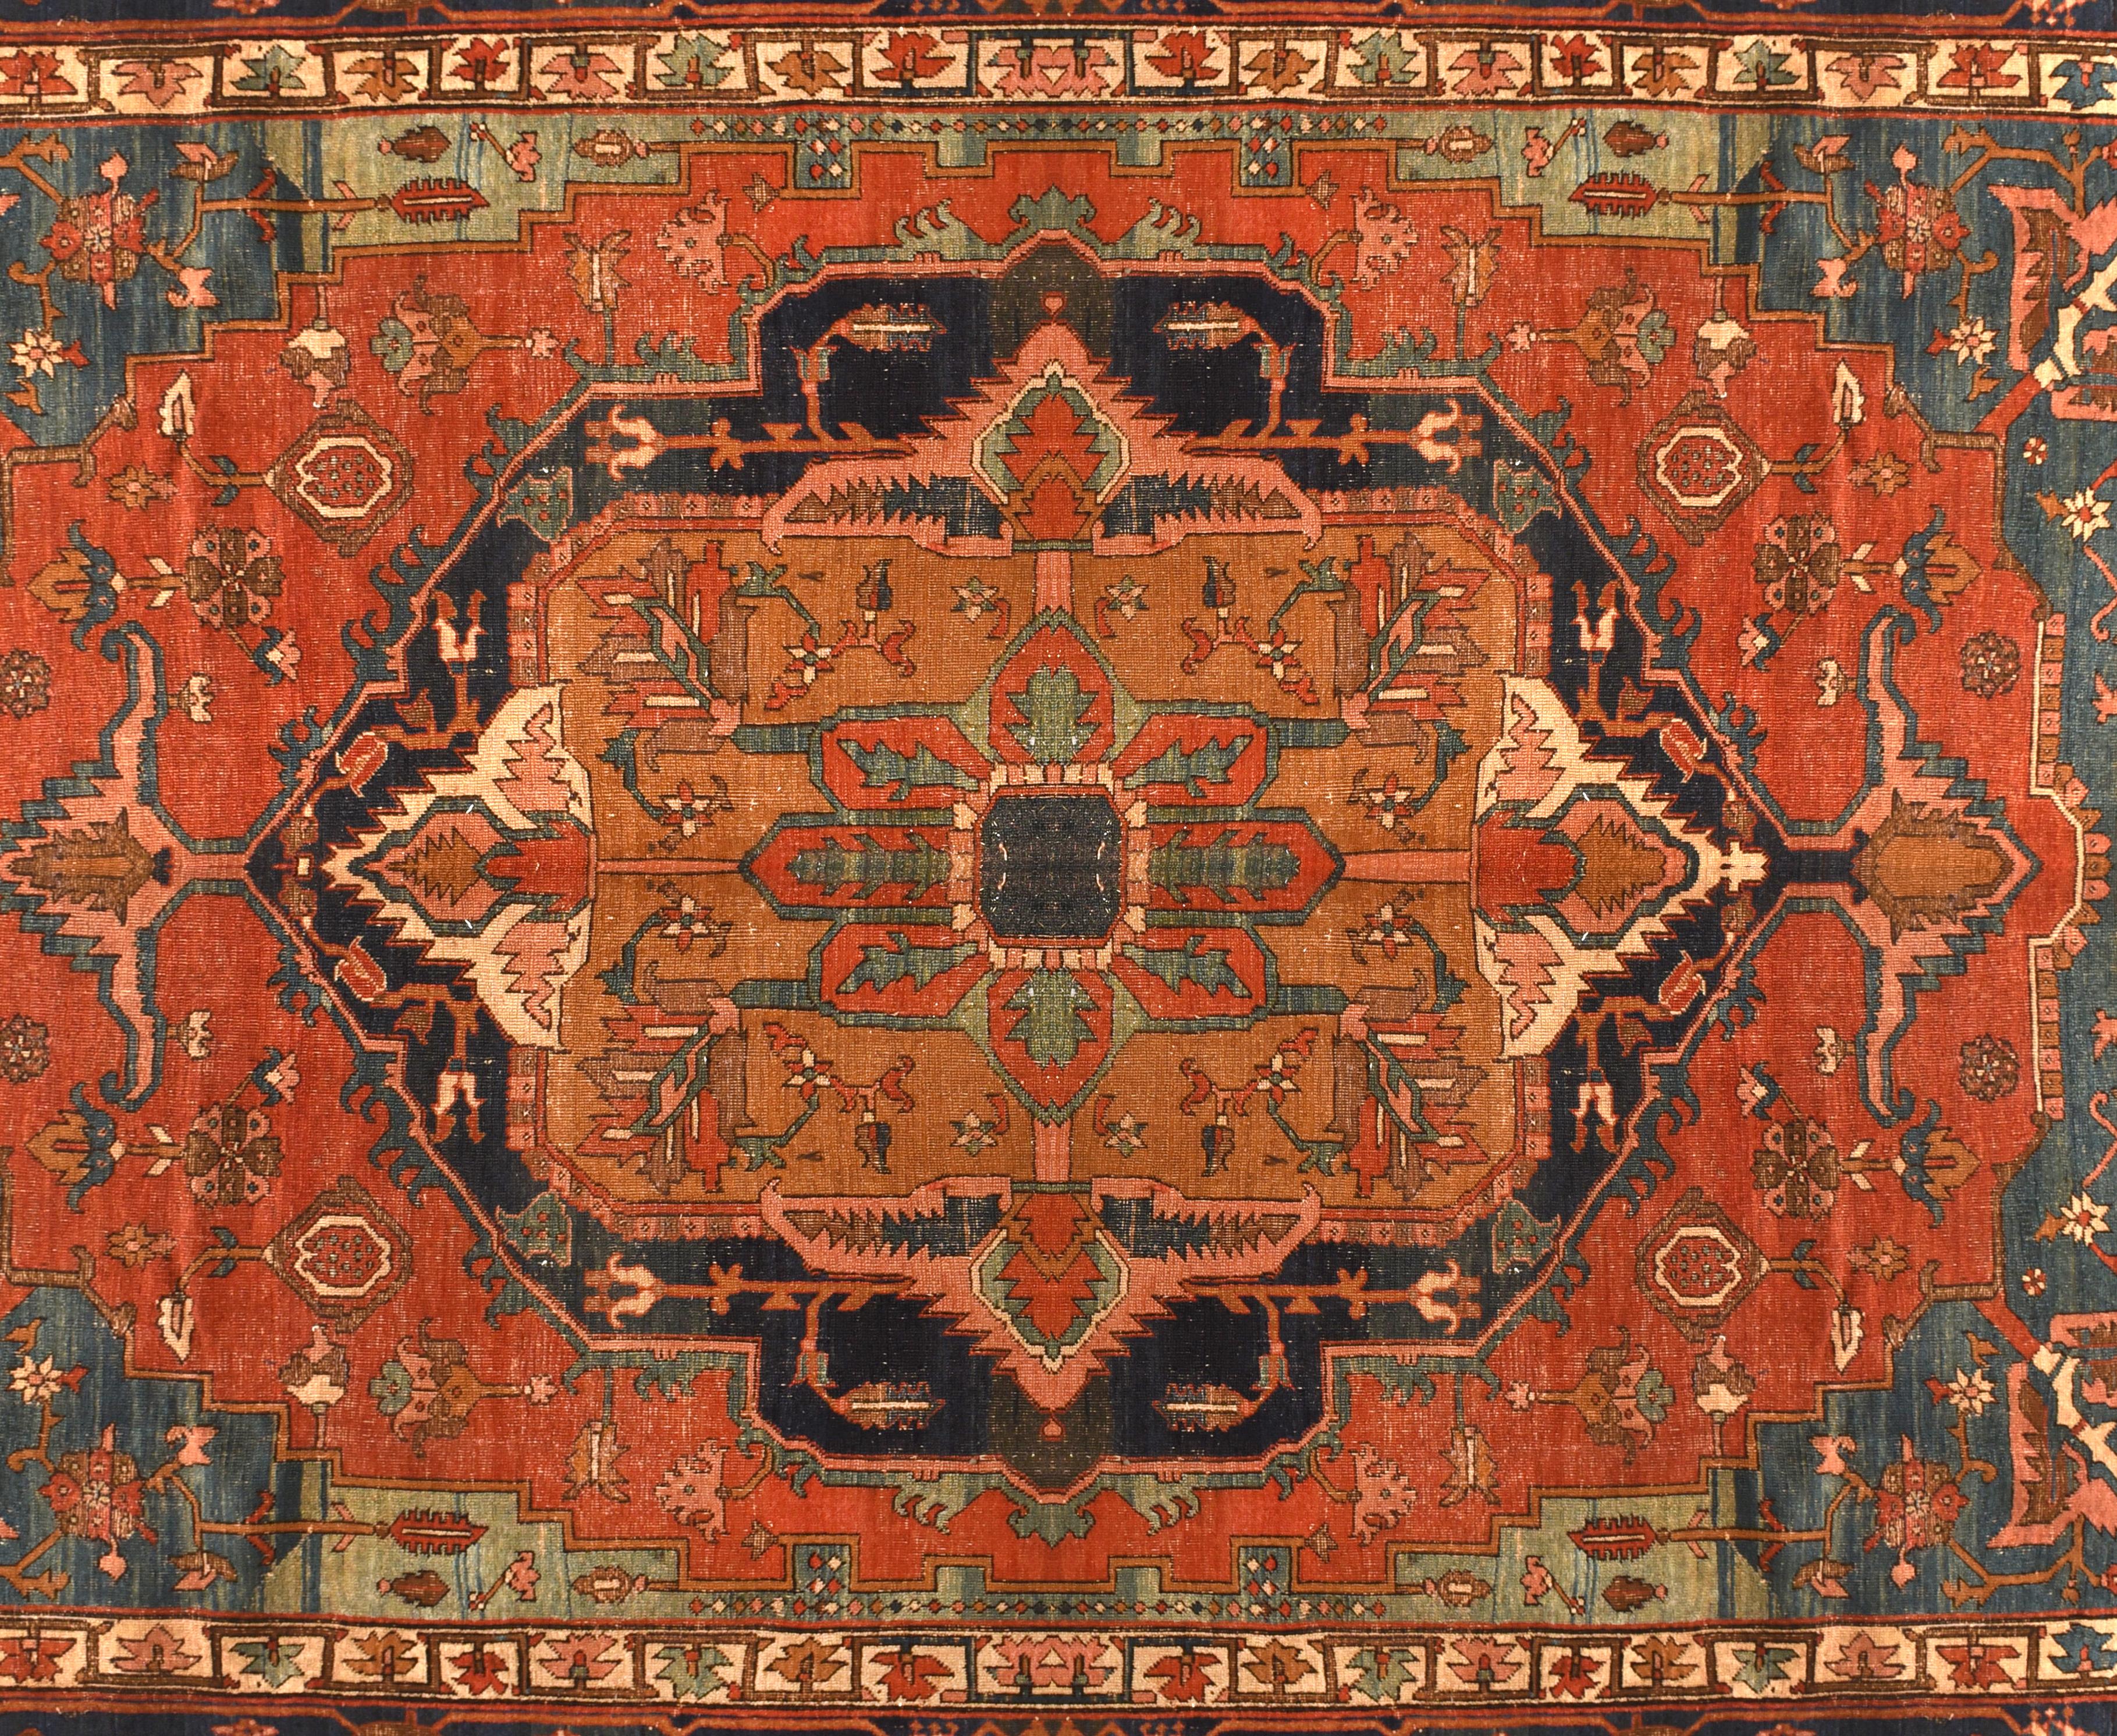 Antique hand-knotted Bakshayesh Persian rug

Bakshayesh is a small village in the Iranian Azerbaijan region, located southwest of Heriz. The area is mostly known for its late 19th-century carpet production, which includes large-sized rugs with